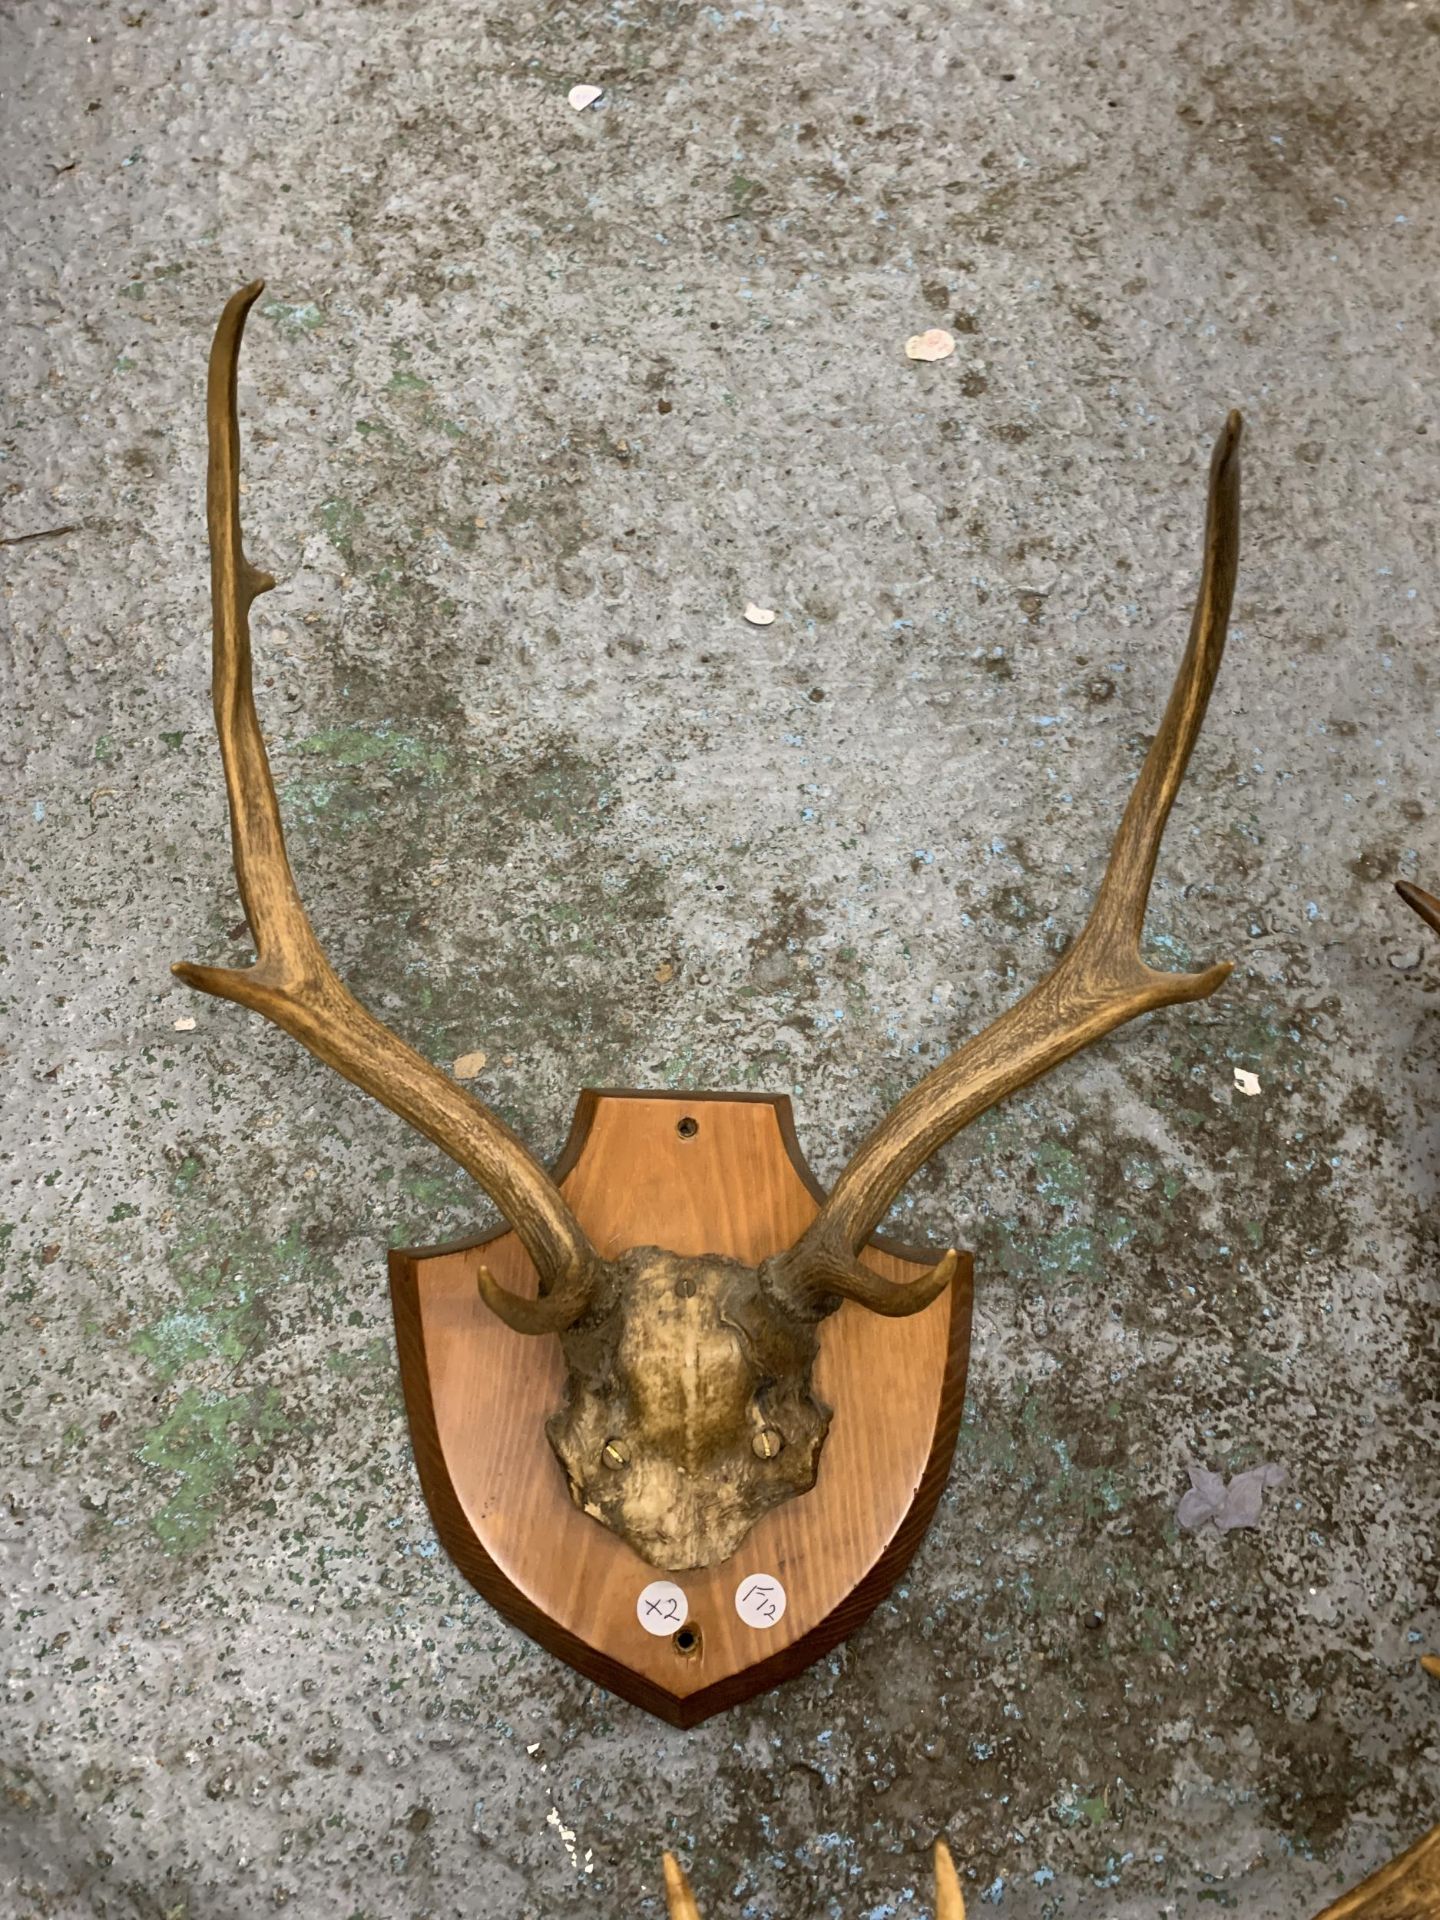 TWO SETS OF ANTLERS MOUNTED ON WOODEN SHEILDS - Image 2 of 3